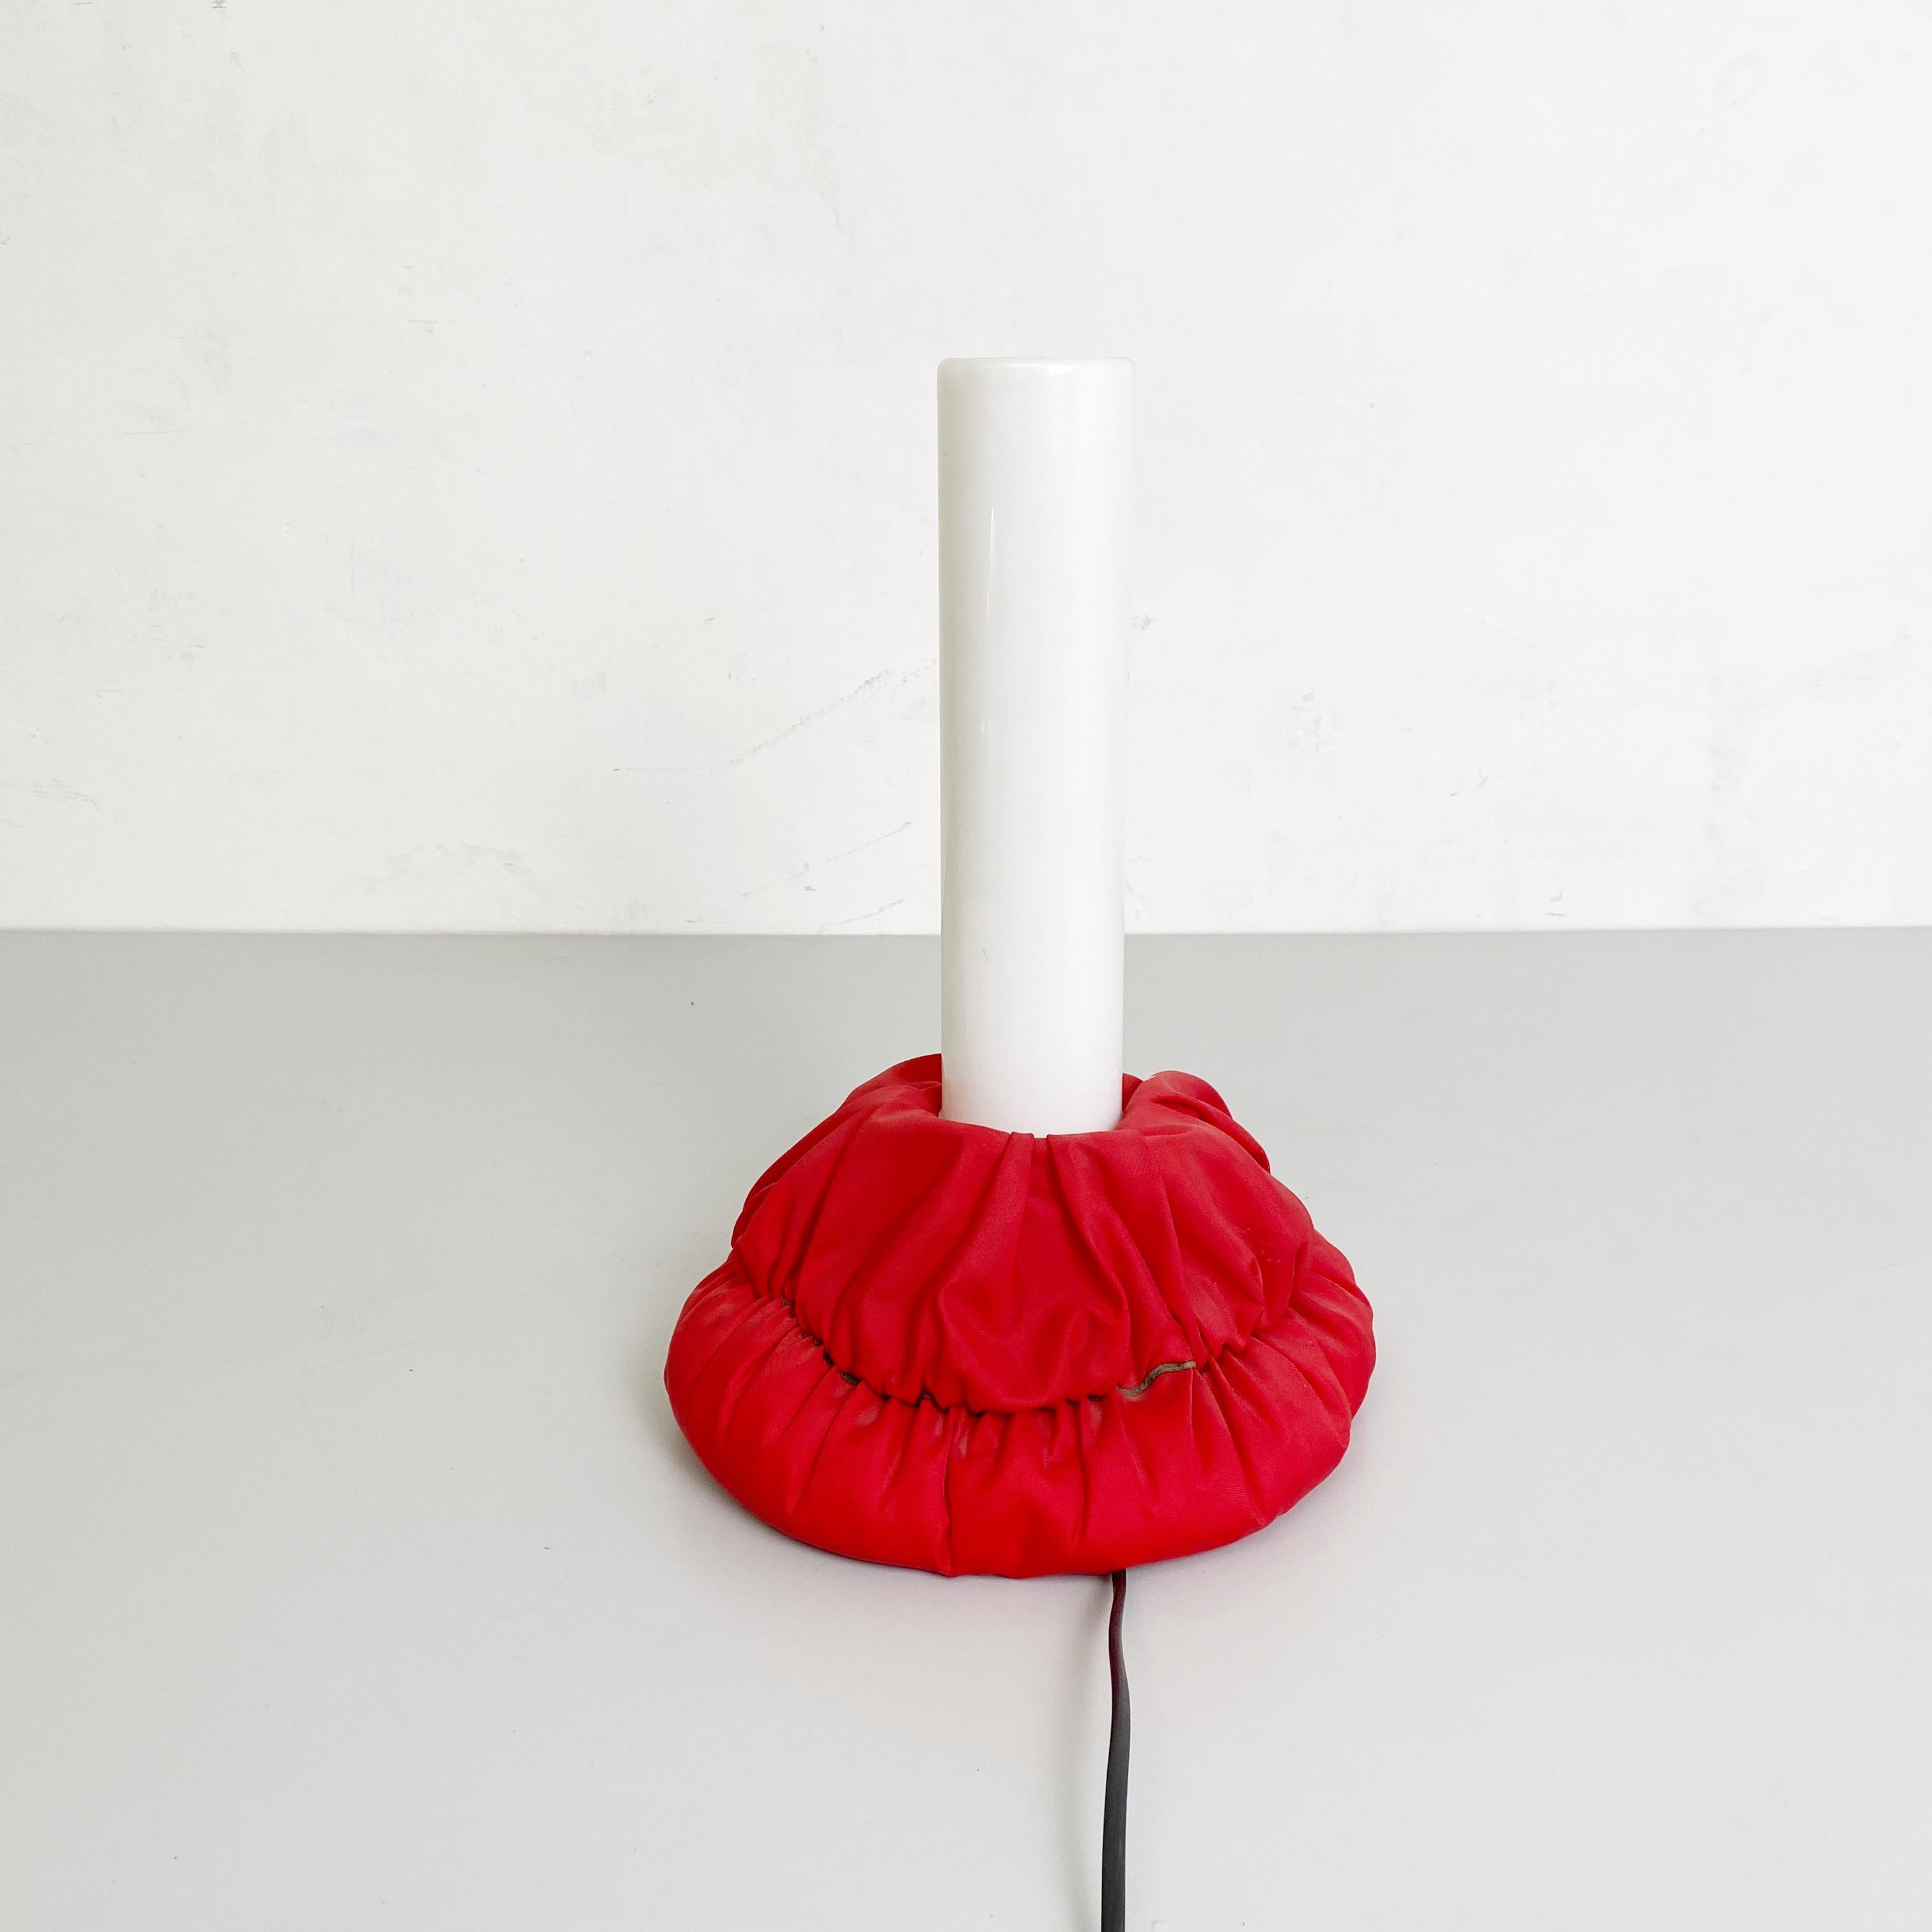 Italian Table Lamp Mod. Cloche by De Pas, D'urbino and Lomazzi for Sirrah, 1982 In Good Condition For Sale In MIlano, IT